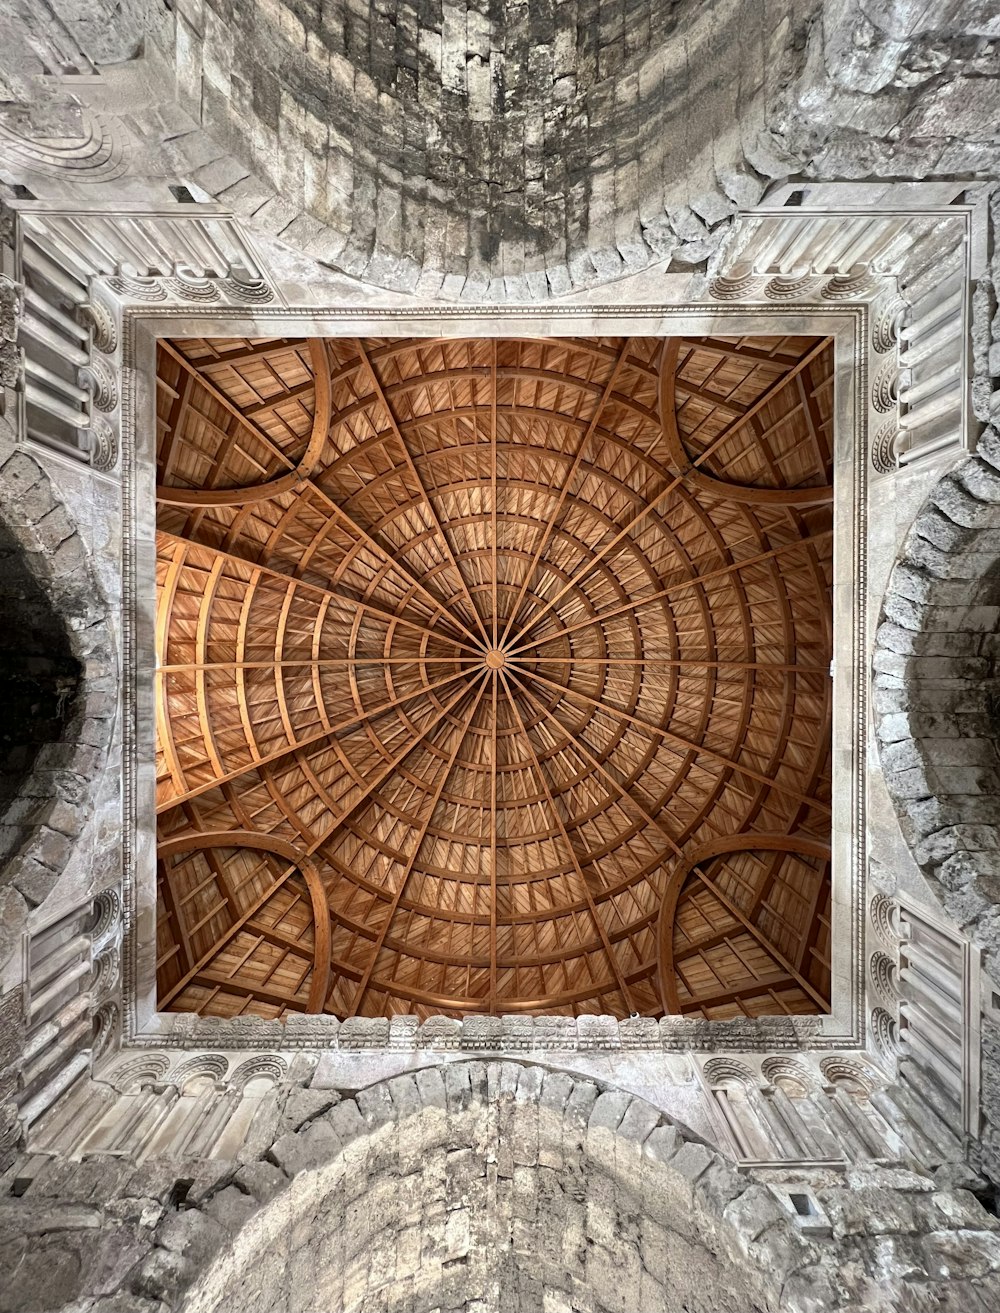 a picture of a ceiling in a building